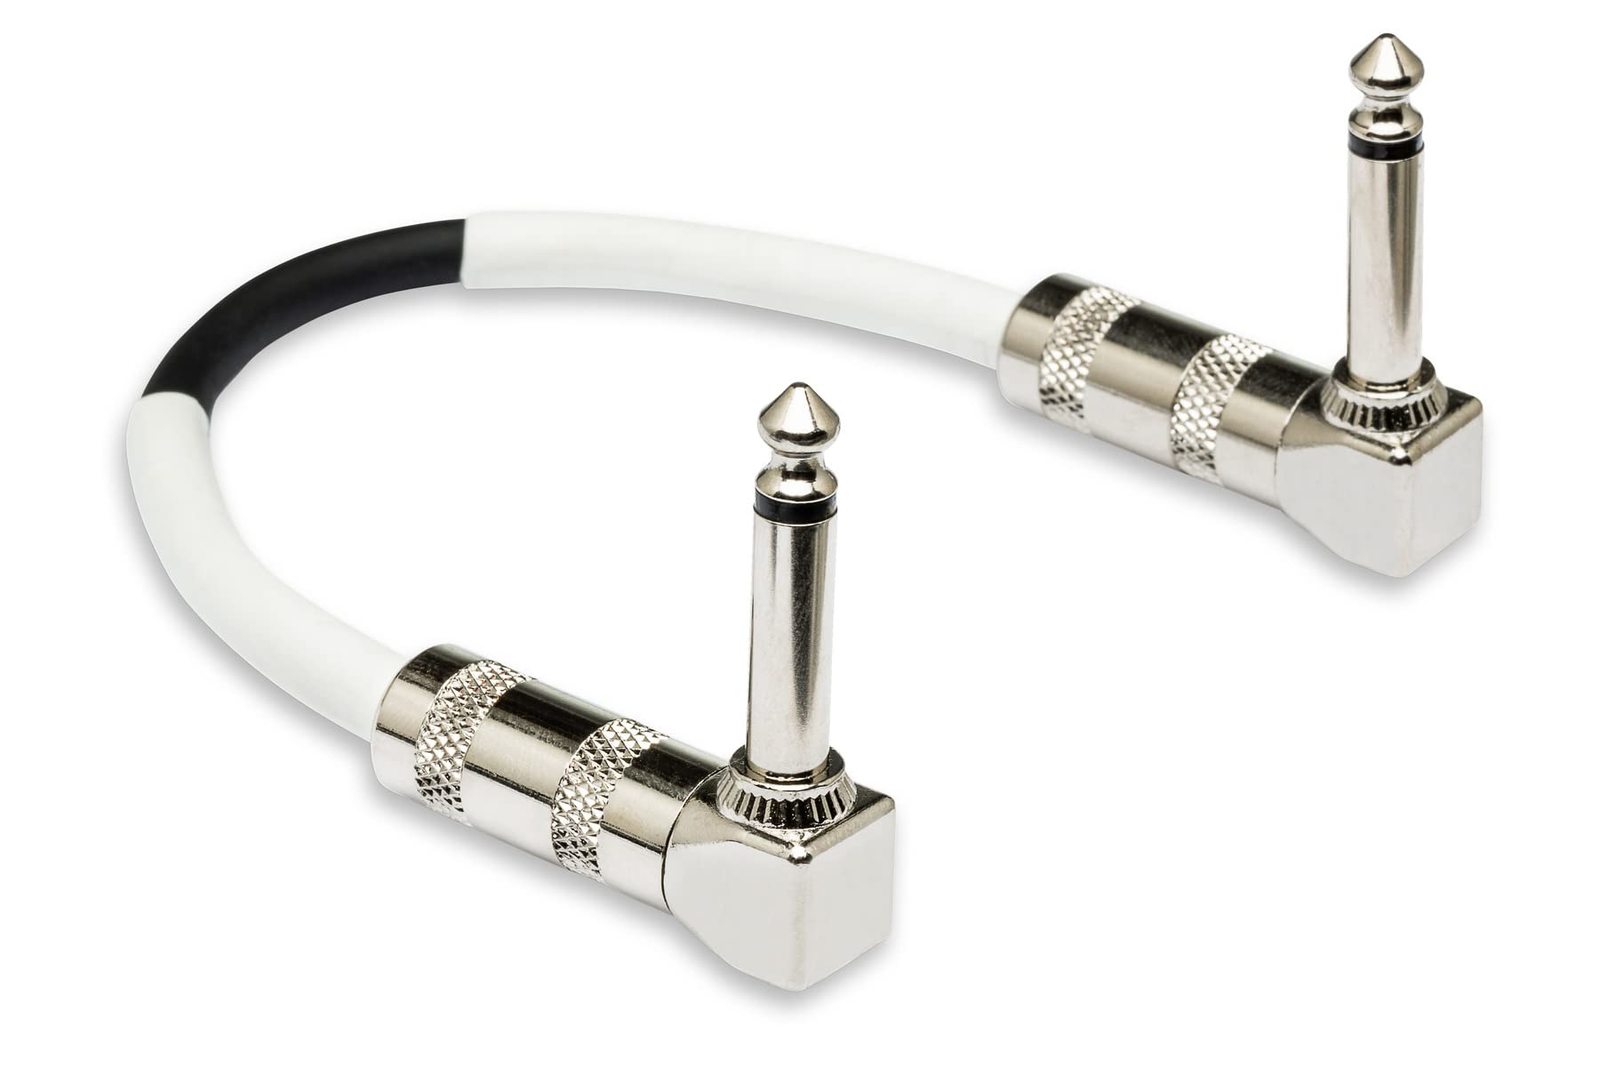 Hosa CPE-106 Right Angle to Right Angle Guitar Patch Cable, 6 Inch - $10.95